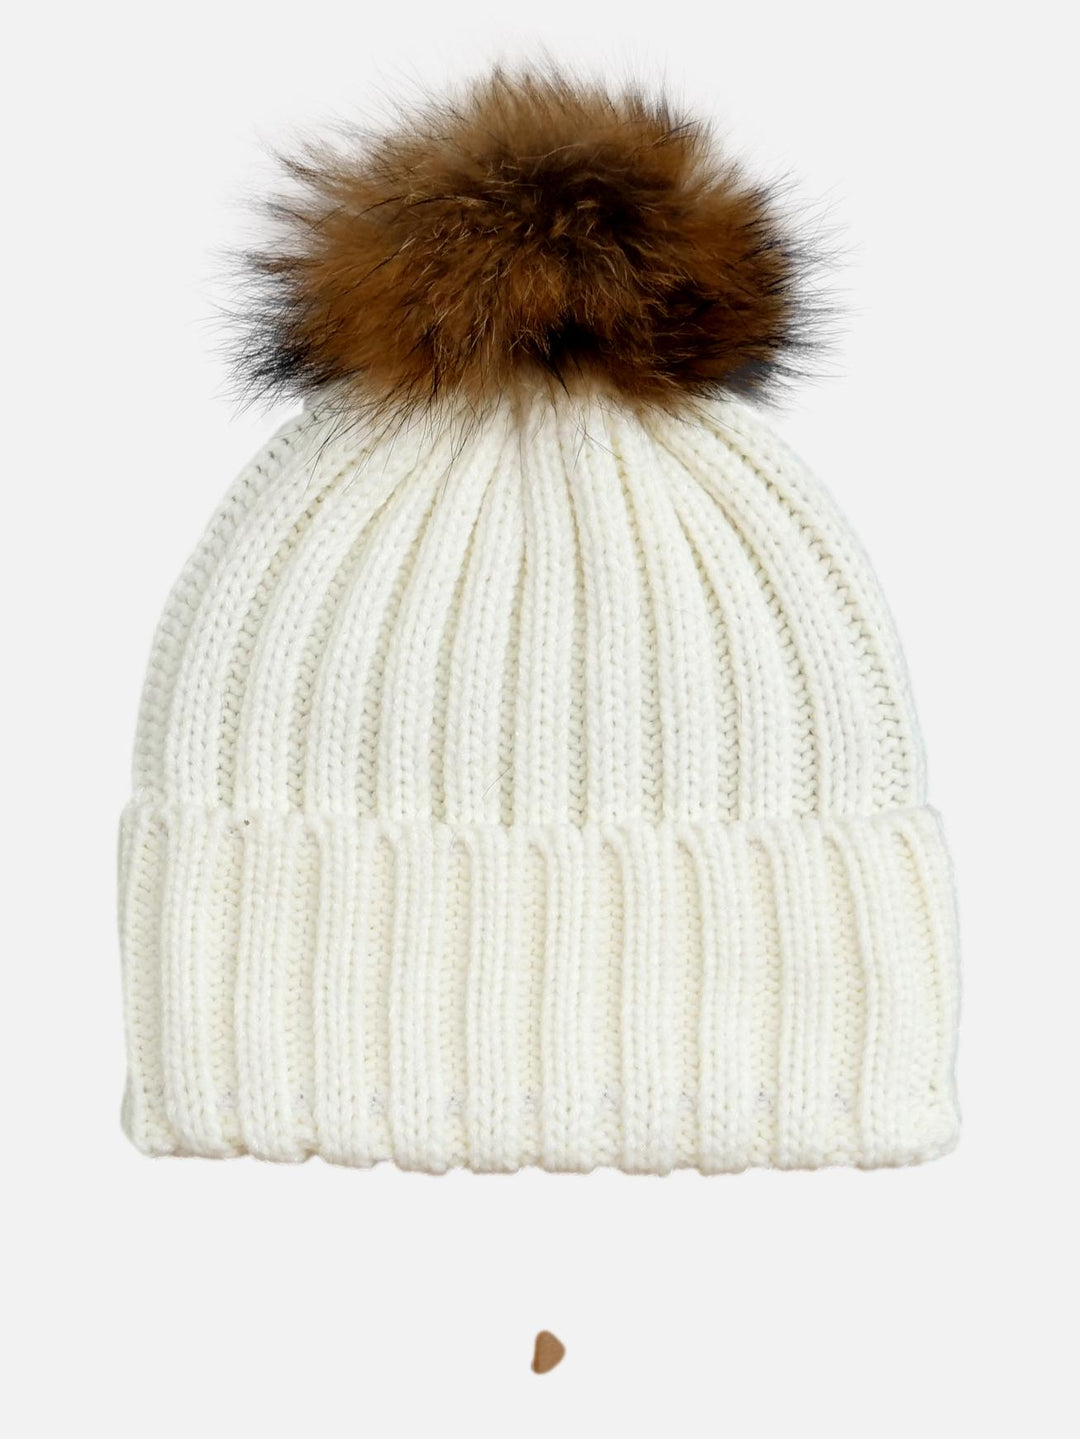 Beanie Hat - Knitted Acrylic - White